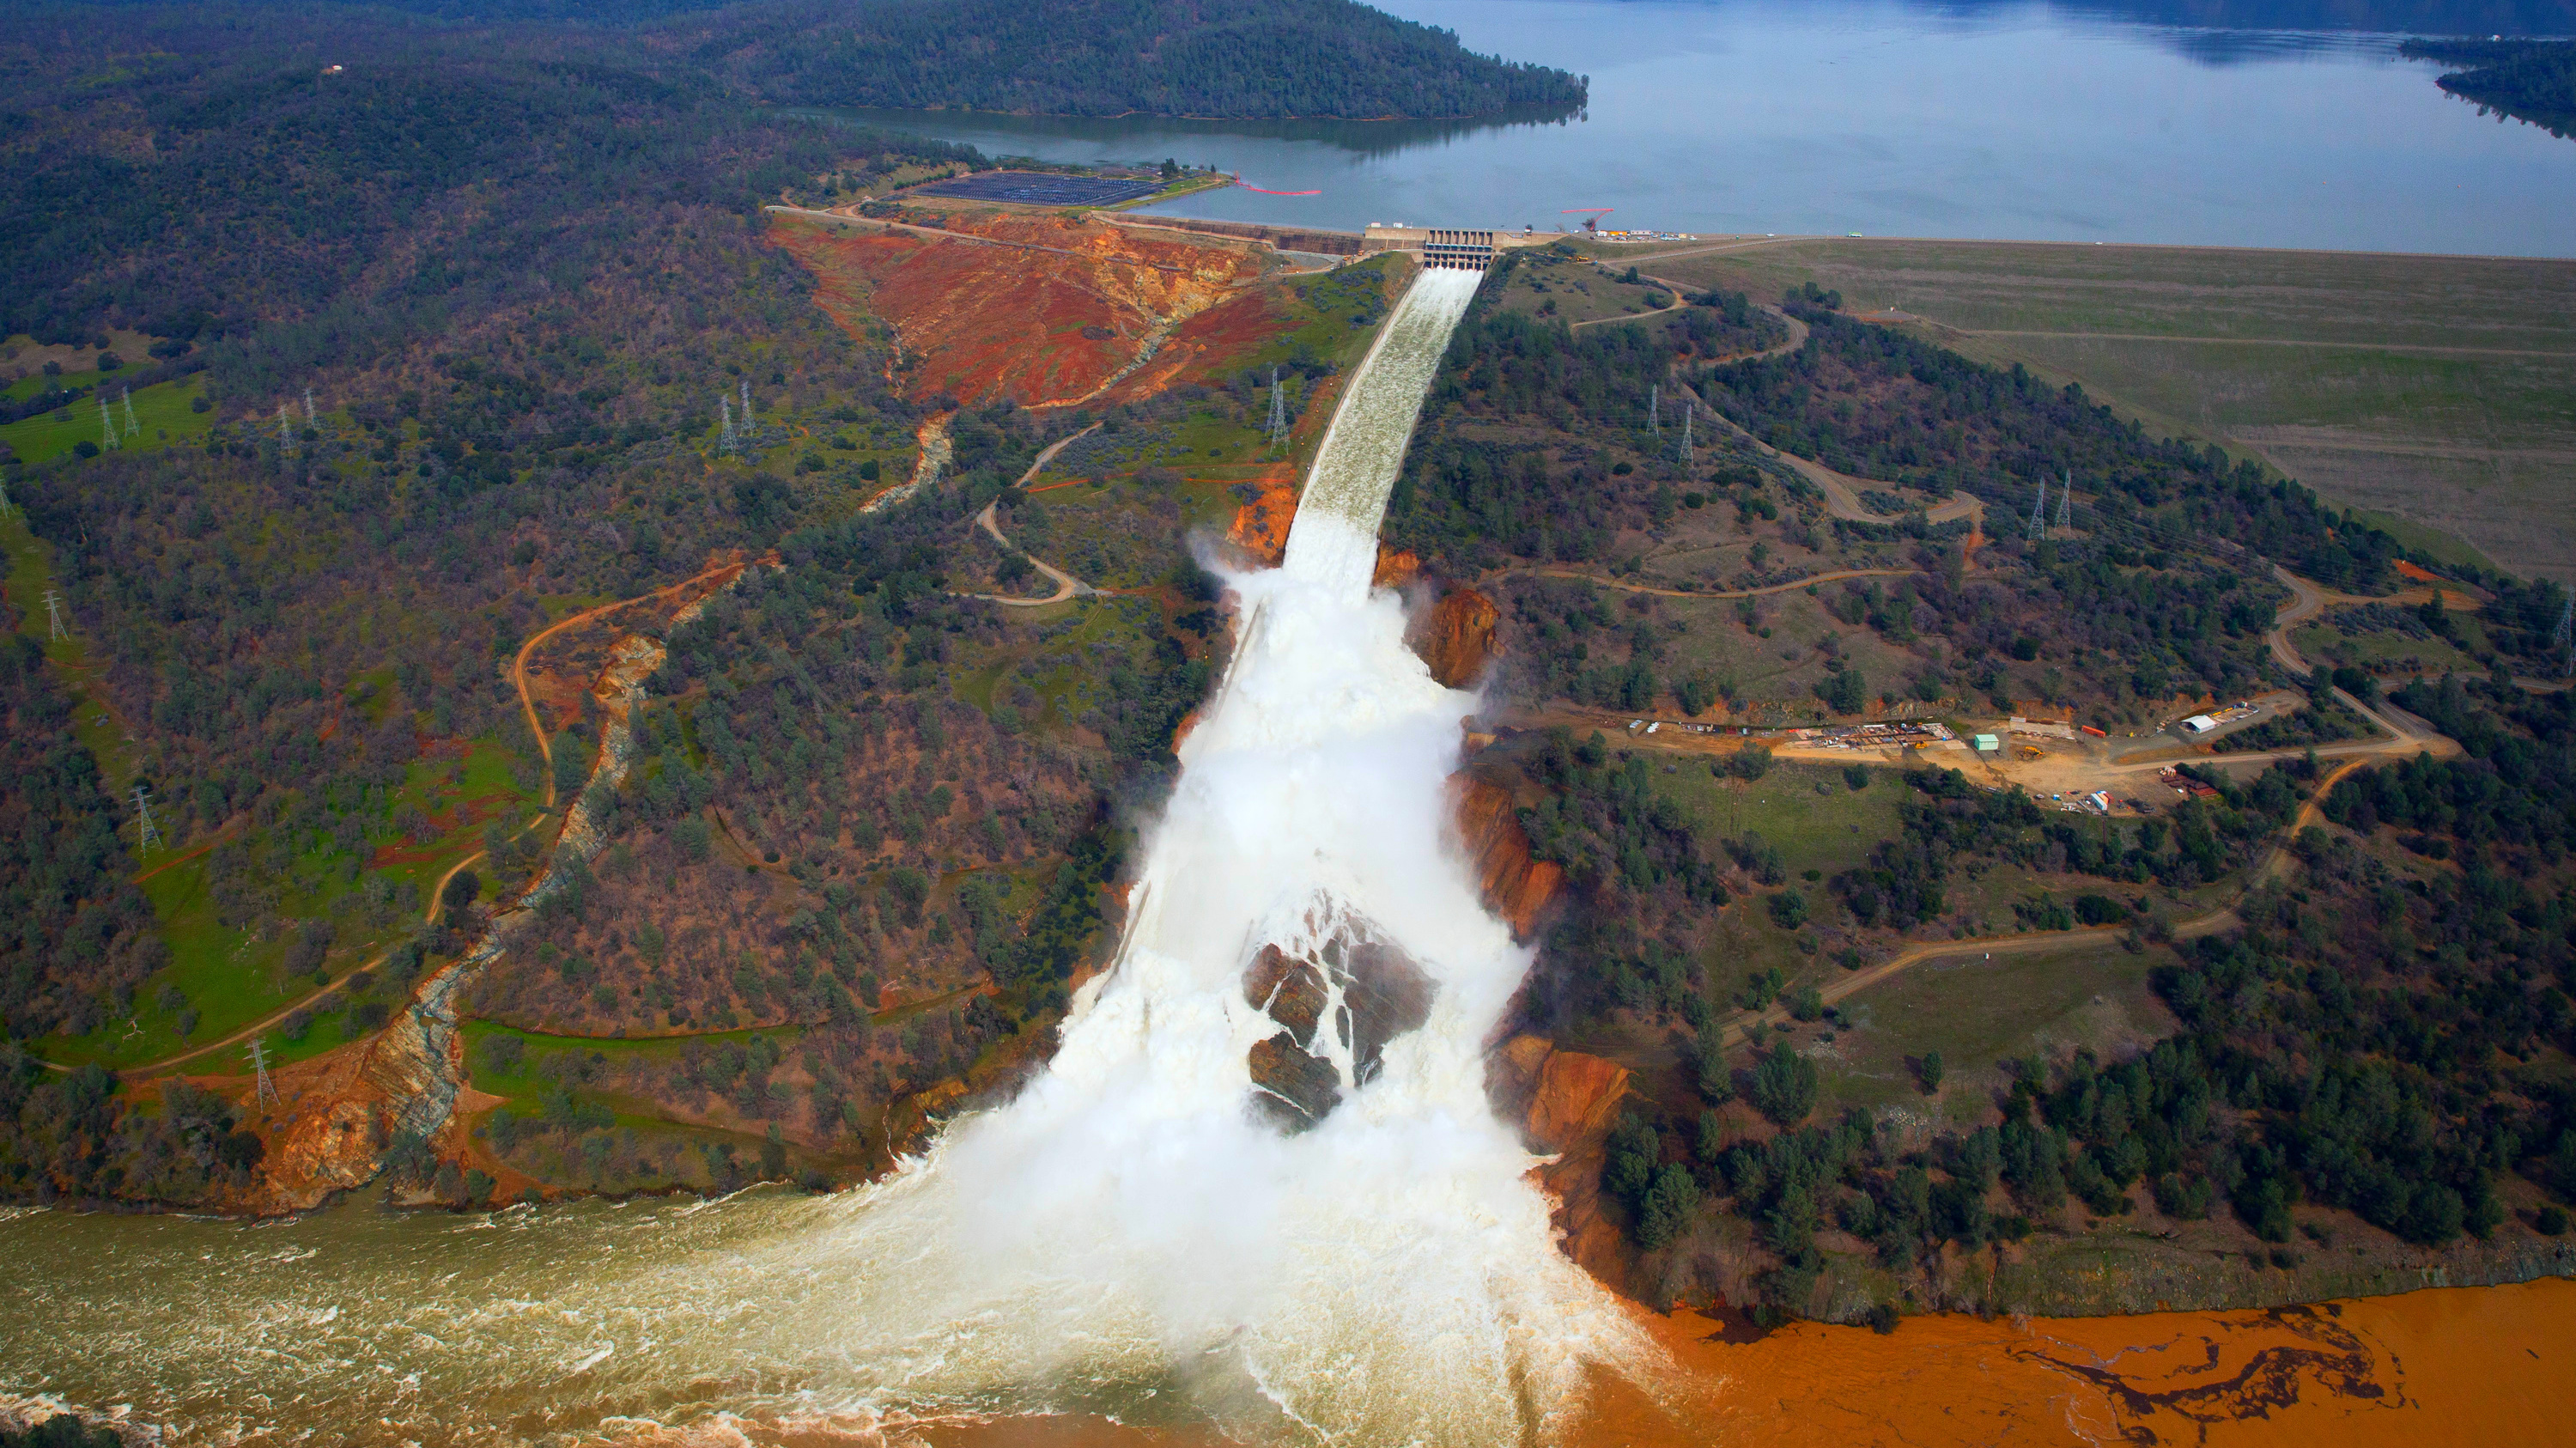 The Oroville Dam in California, which forced almost 20,000 people from their homes after a spillway threatened to fail